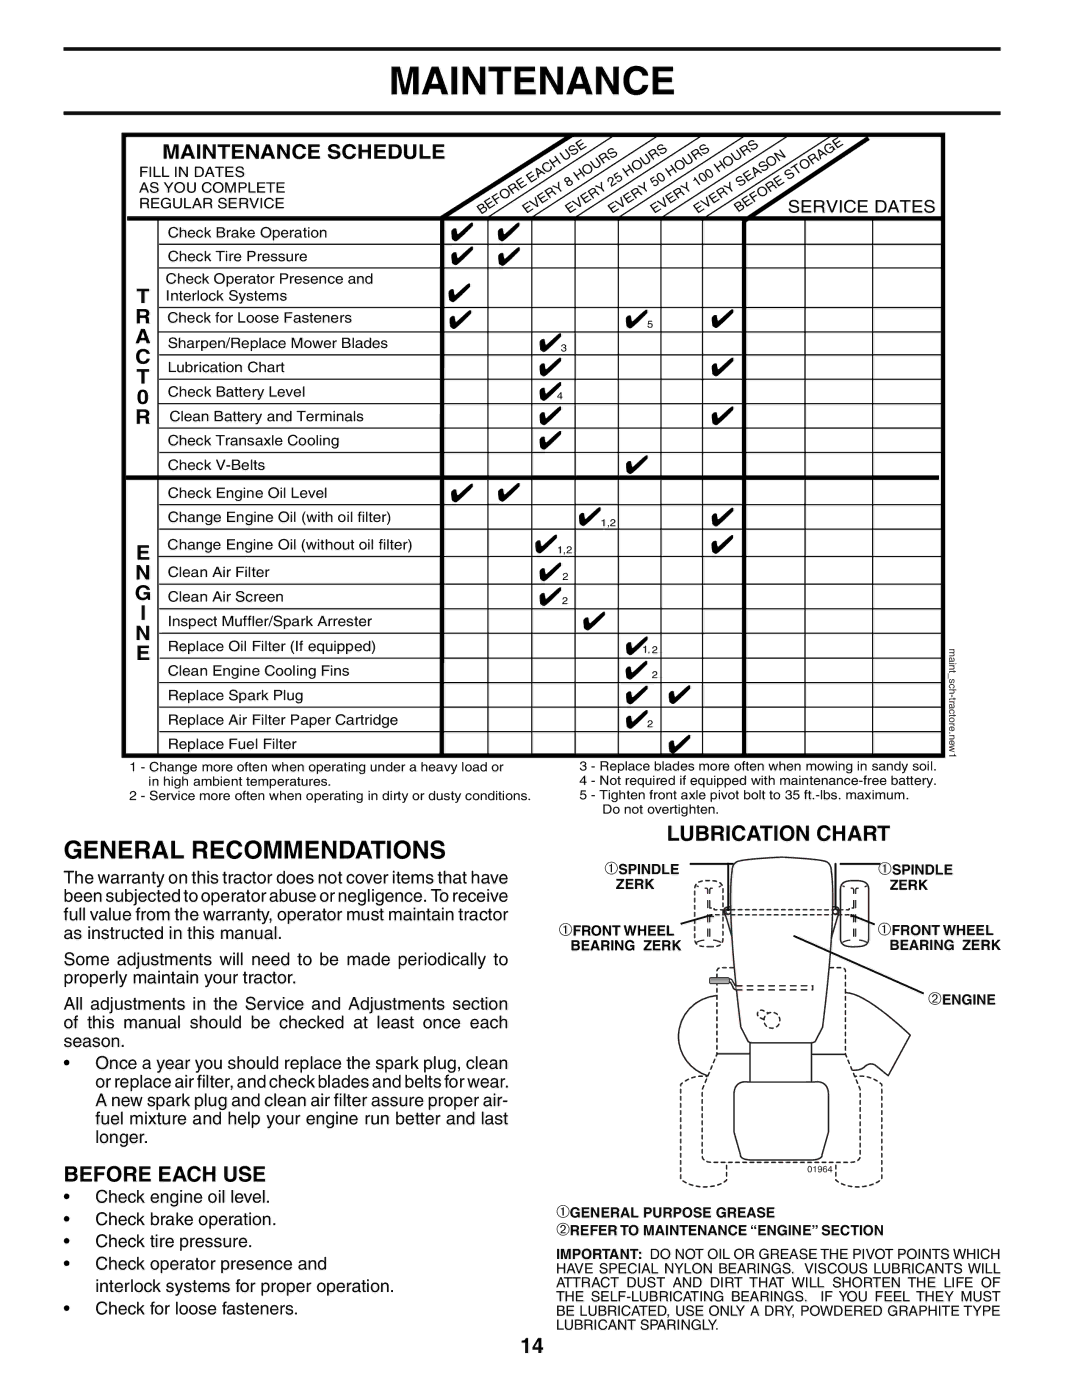 Poulan PO13T38A manual Maintenance, General Recommendations, Lubrication Chart, Before Each USE 